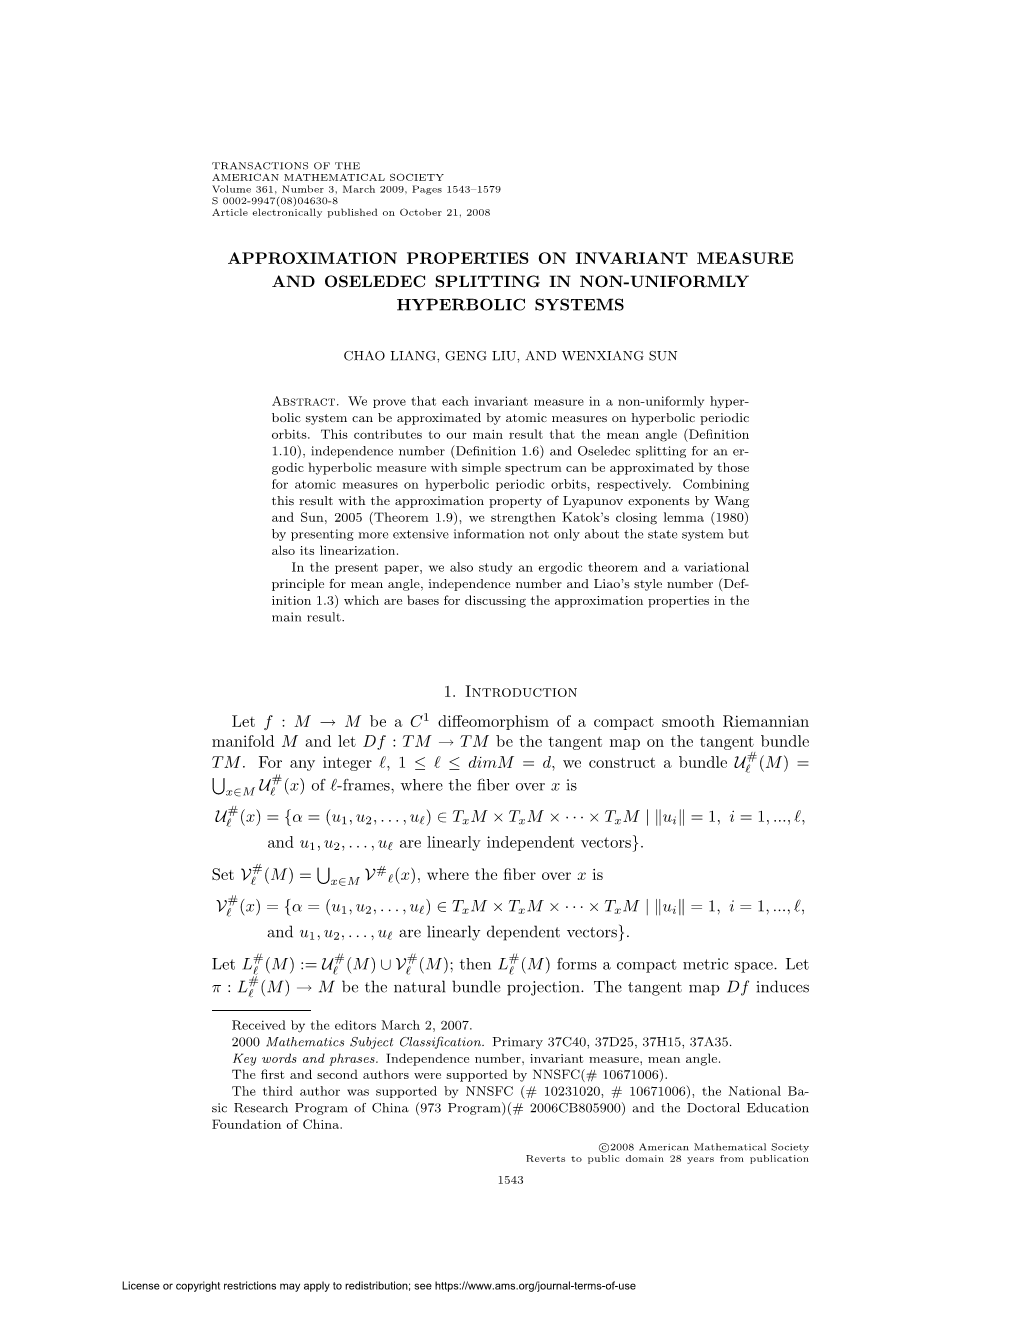 Approximation Properties on Invariant Measure and Oseledec Splitting in Non-Uniformly Hyperbolic Systems